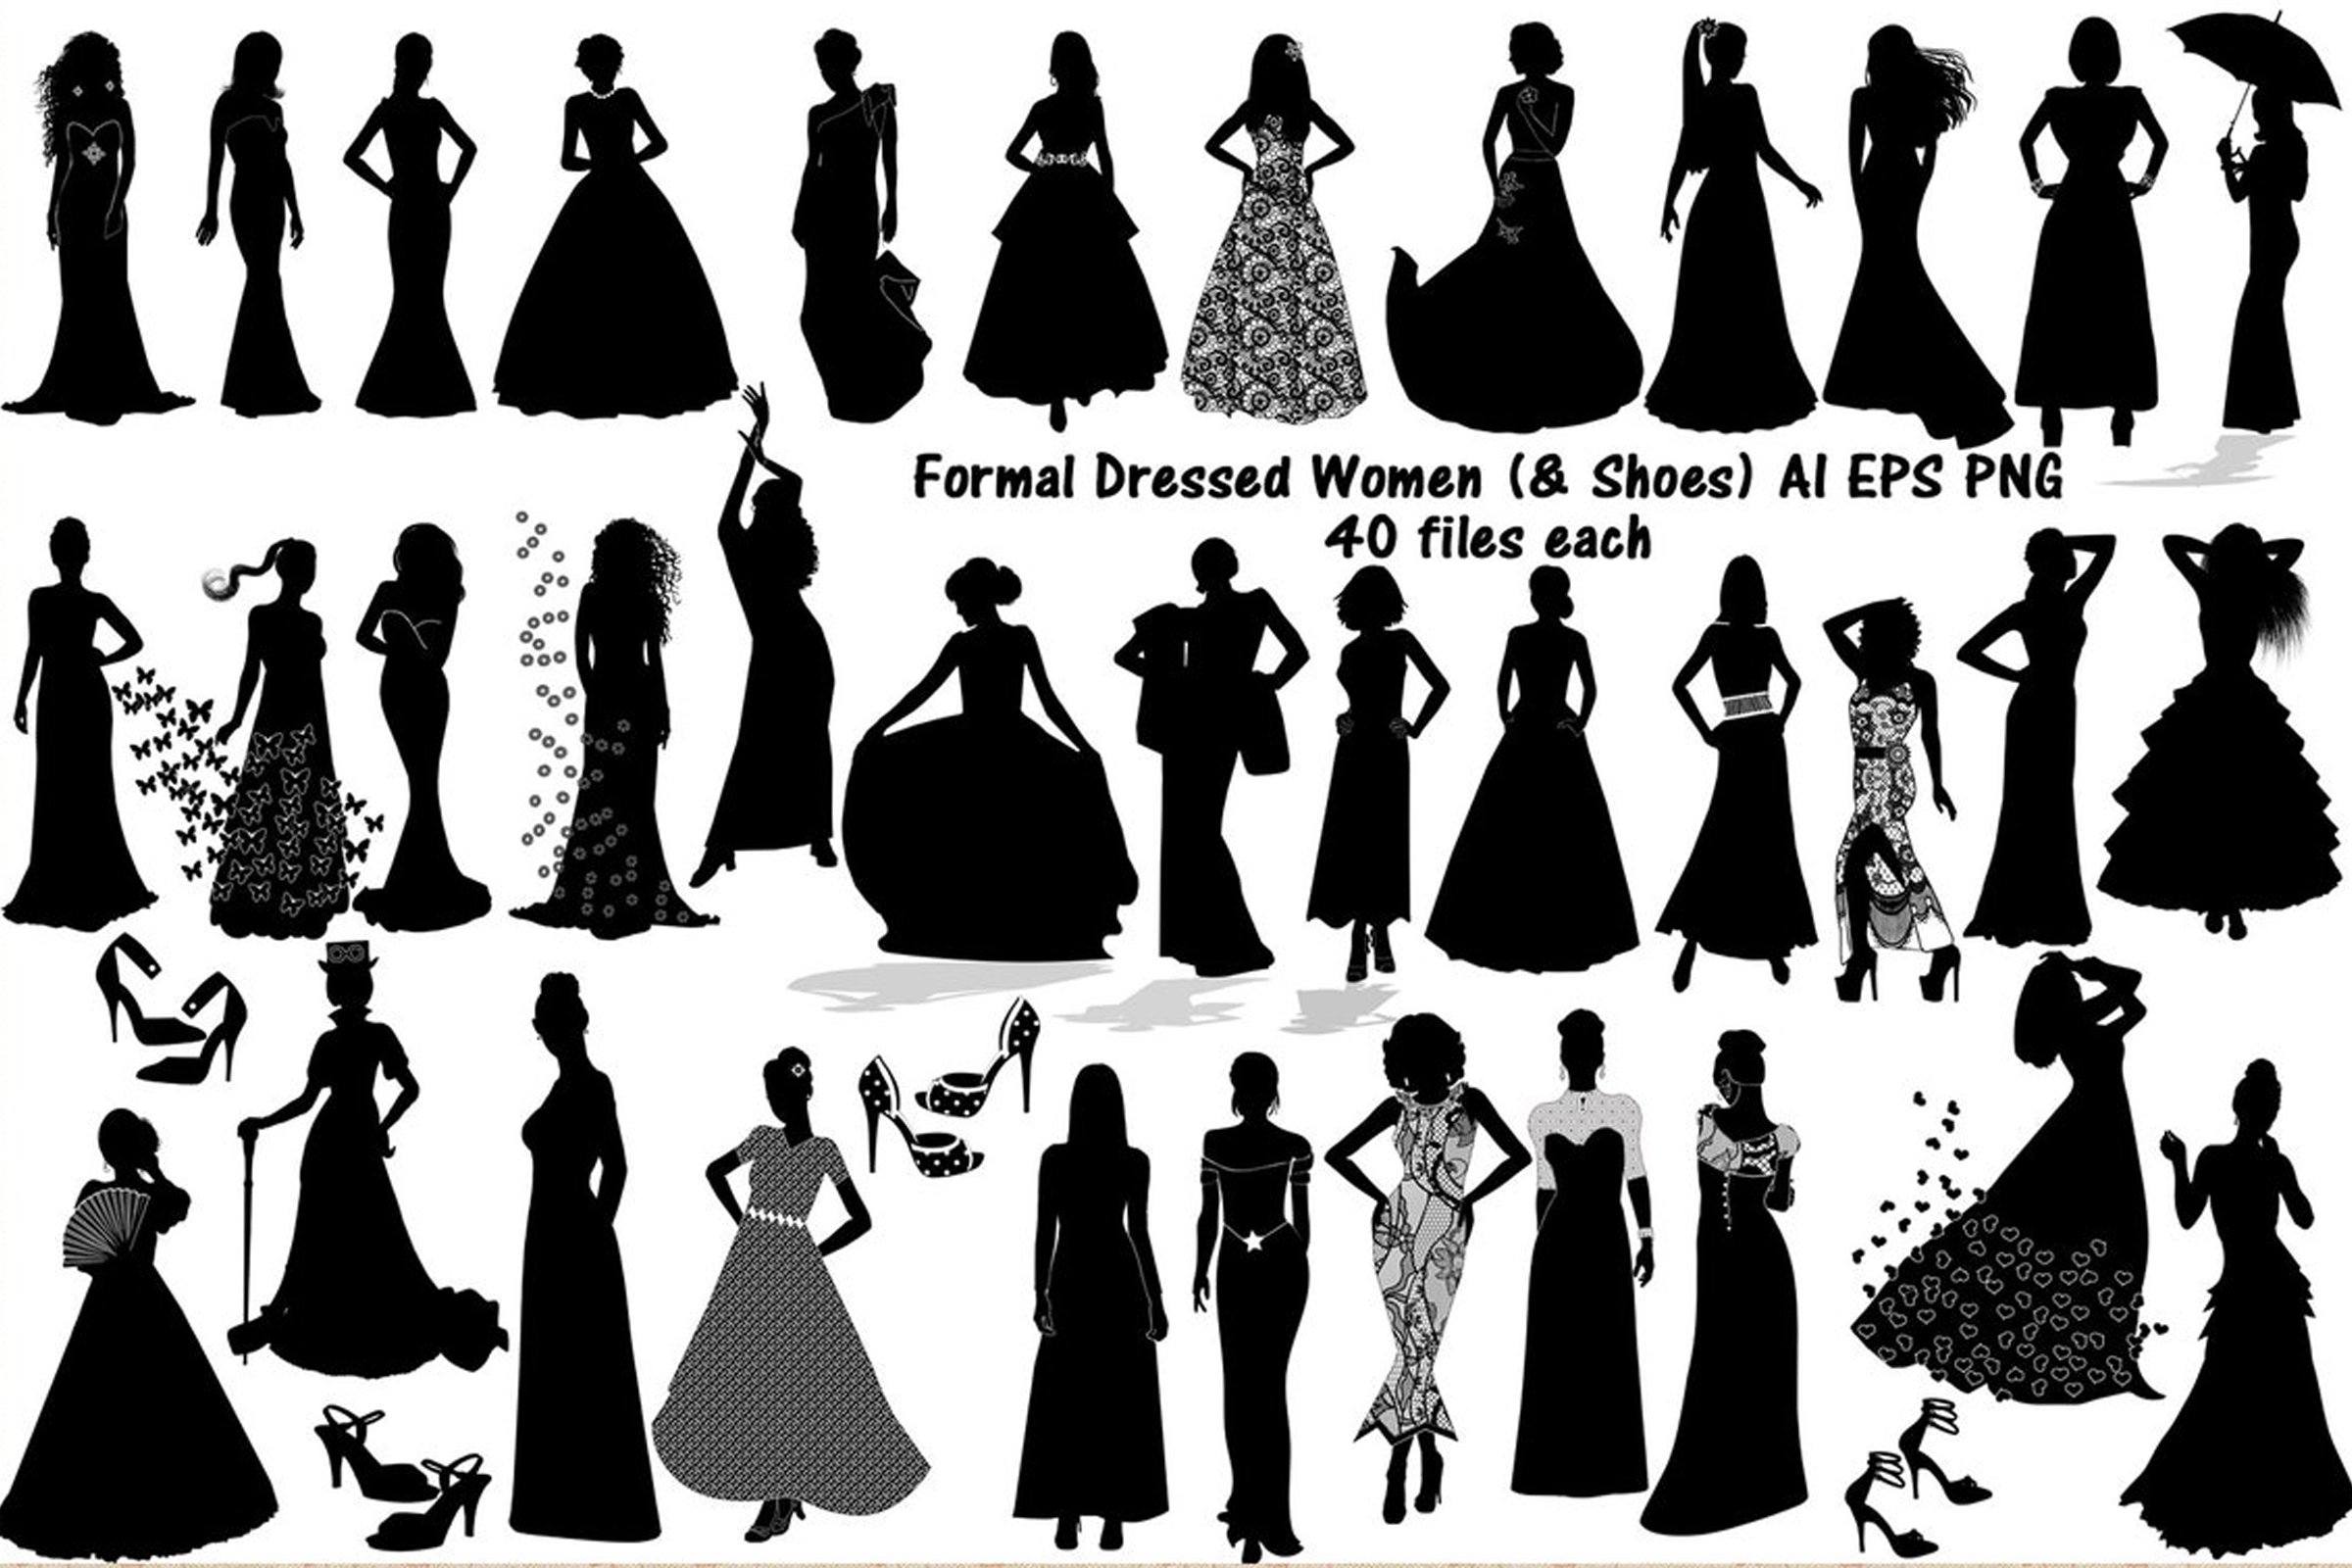 Formal Dressed Women AI Vector PNG cover image.